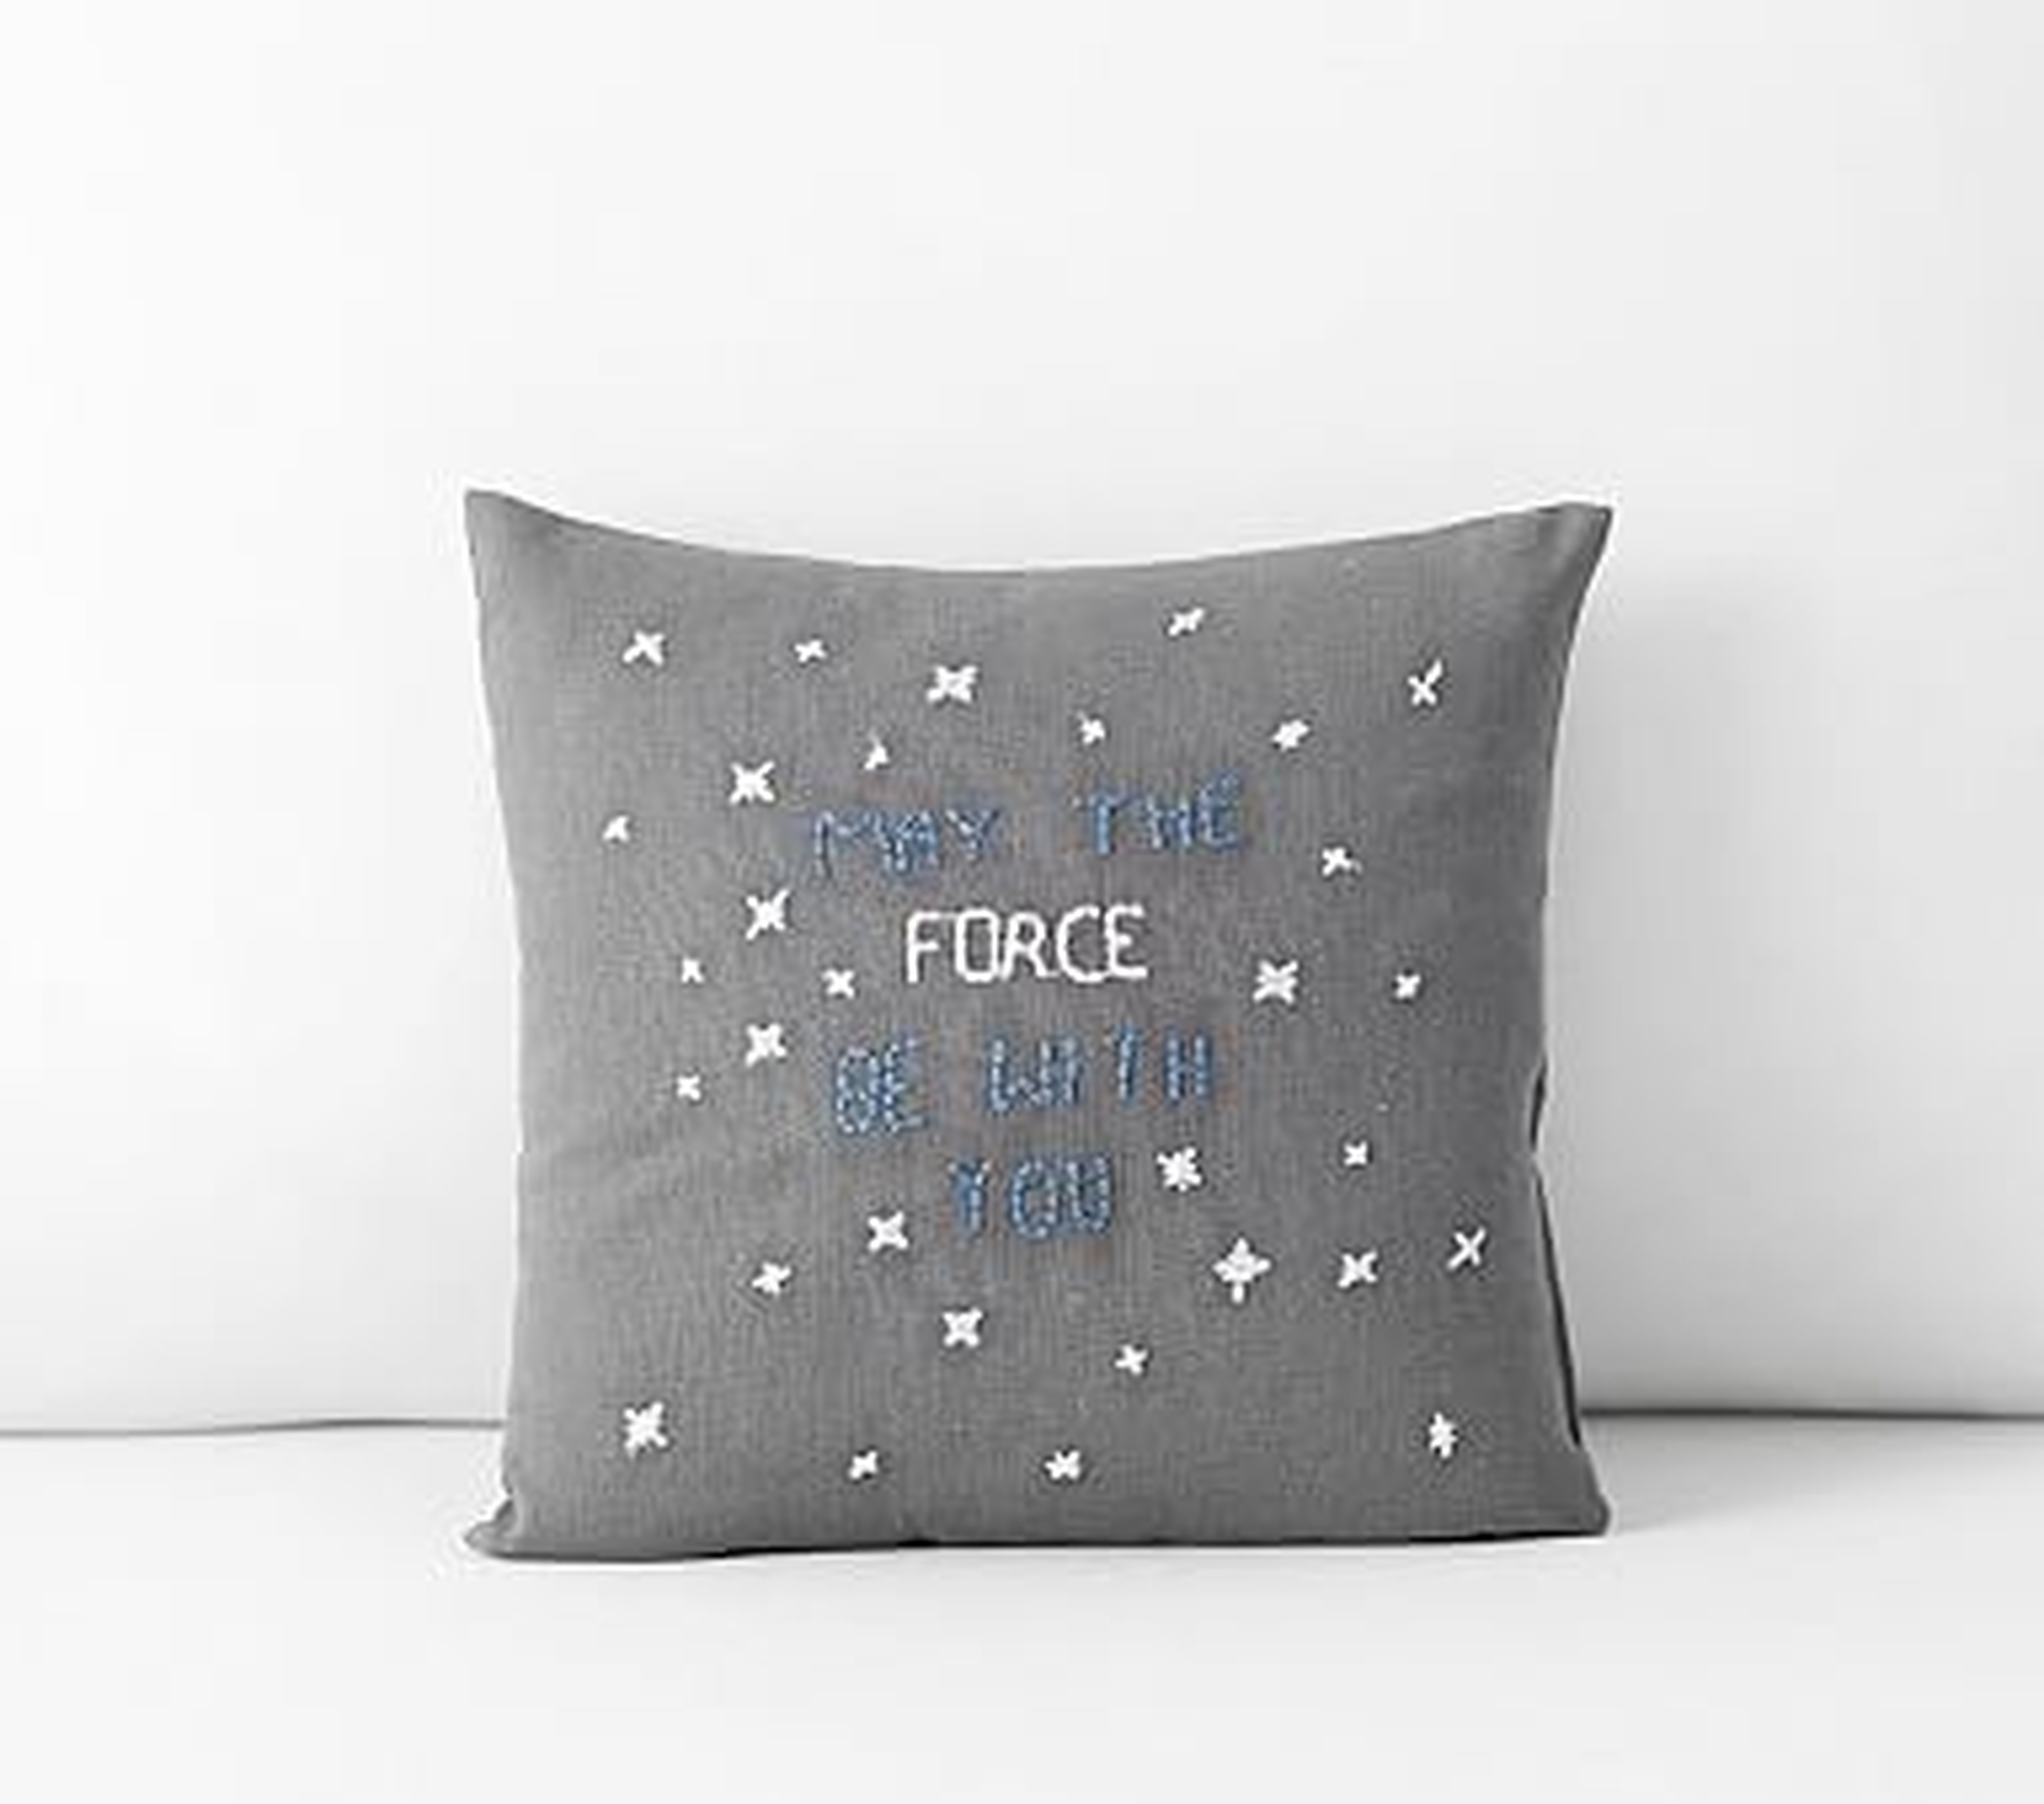 Star Wars(TM) May The Force Be With You Pillow, 10x10", Grey - Pottery Barn Kids